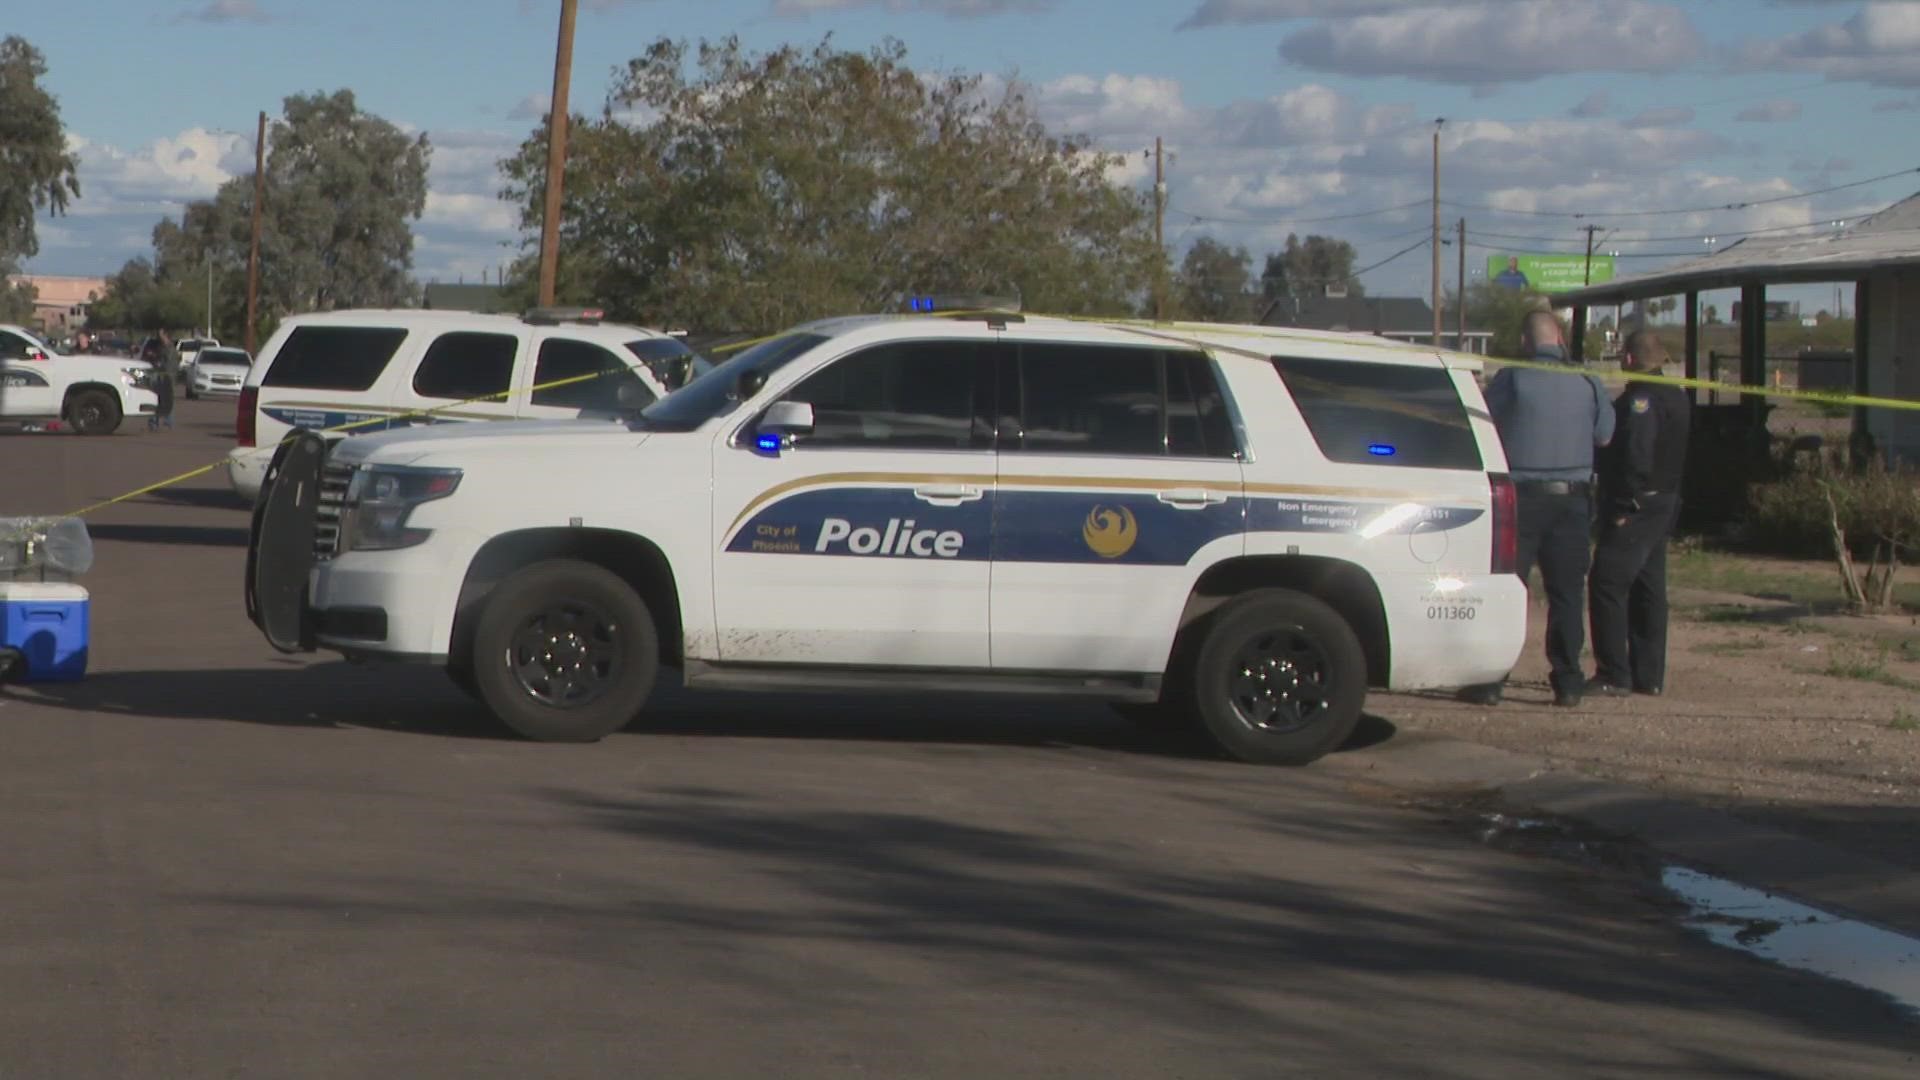 A man has died in a shooting near 7th and Apache streets, according to Phoenix police.